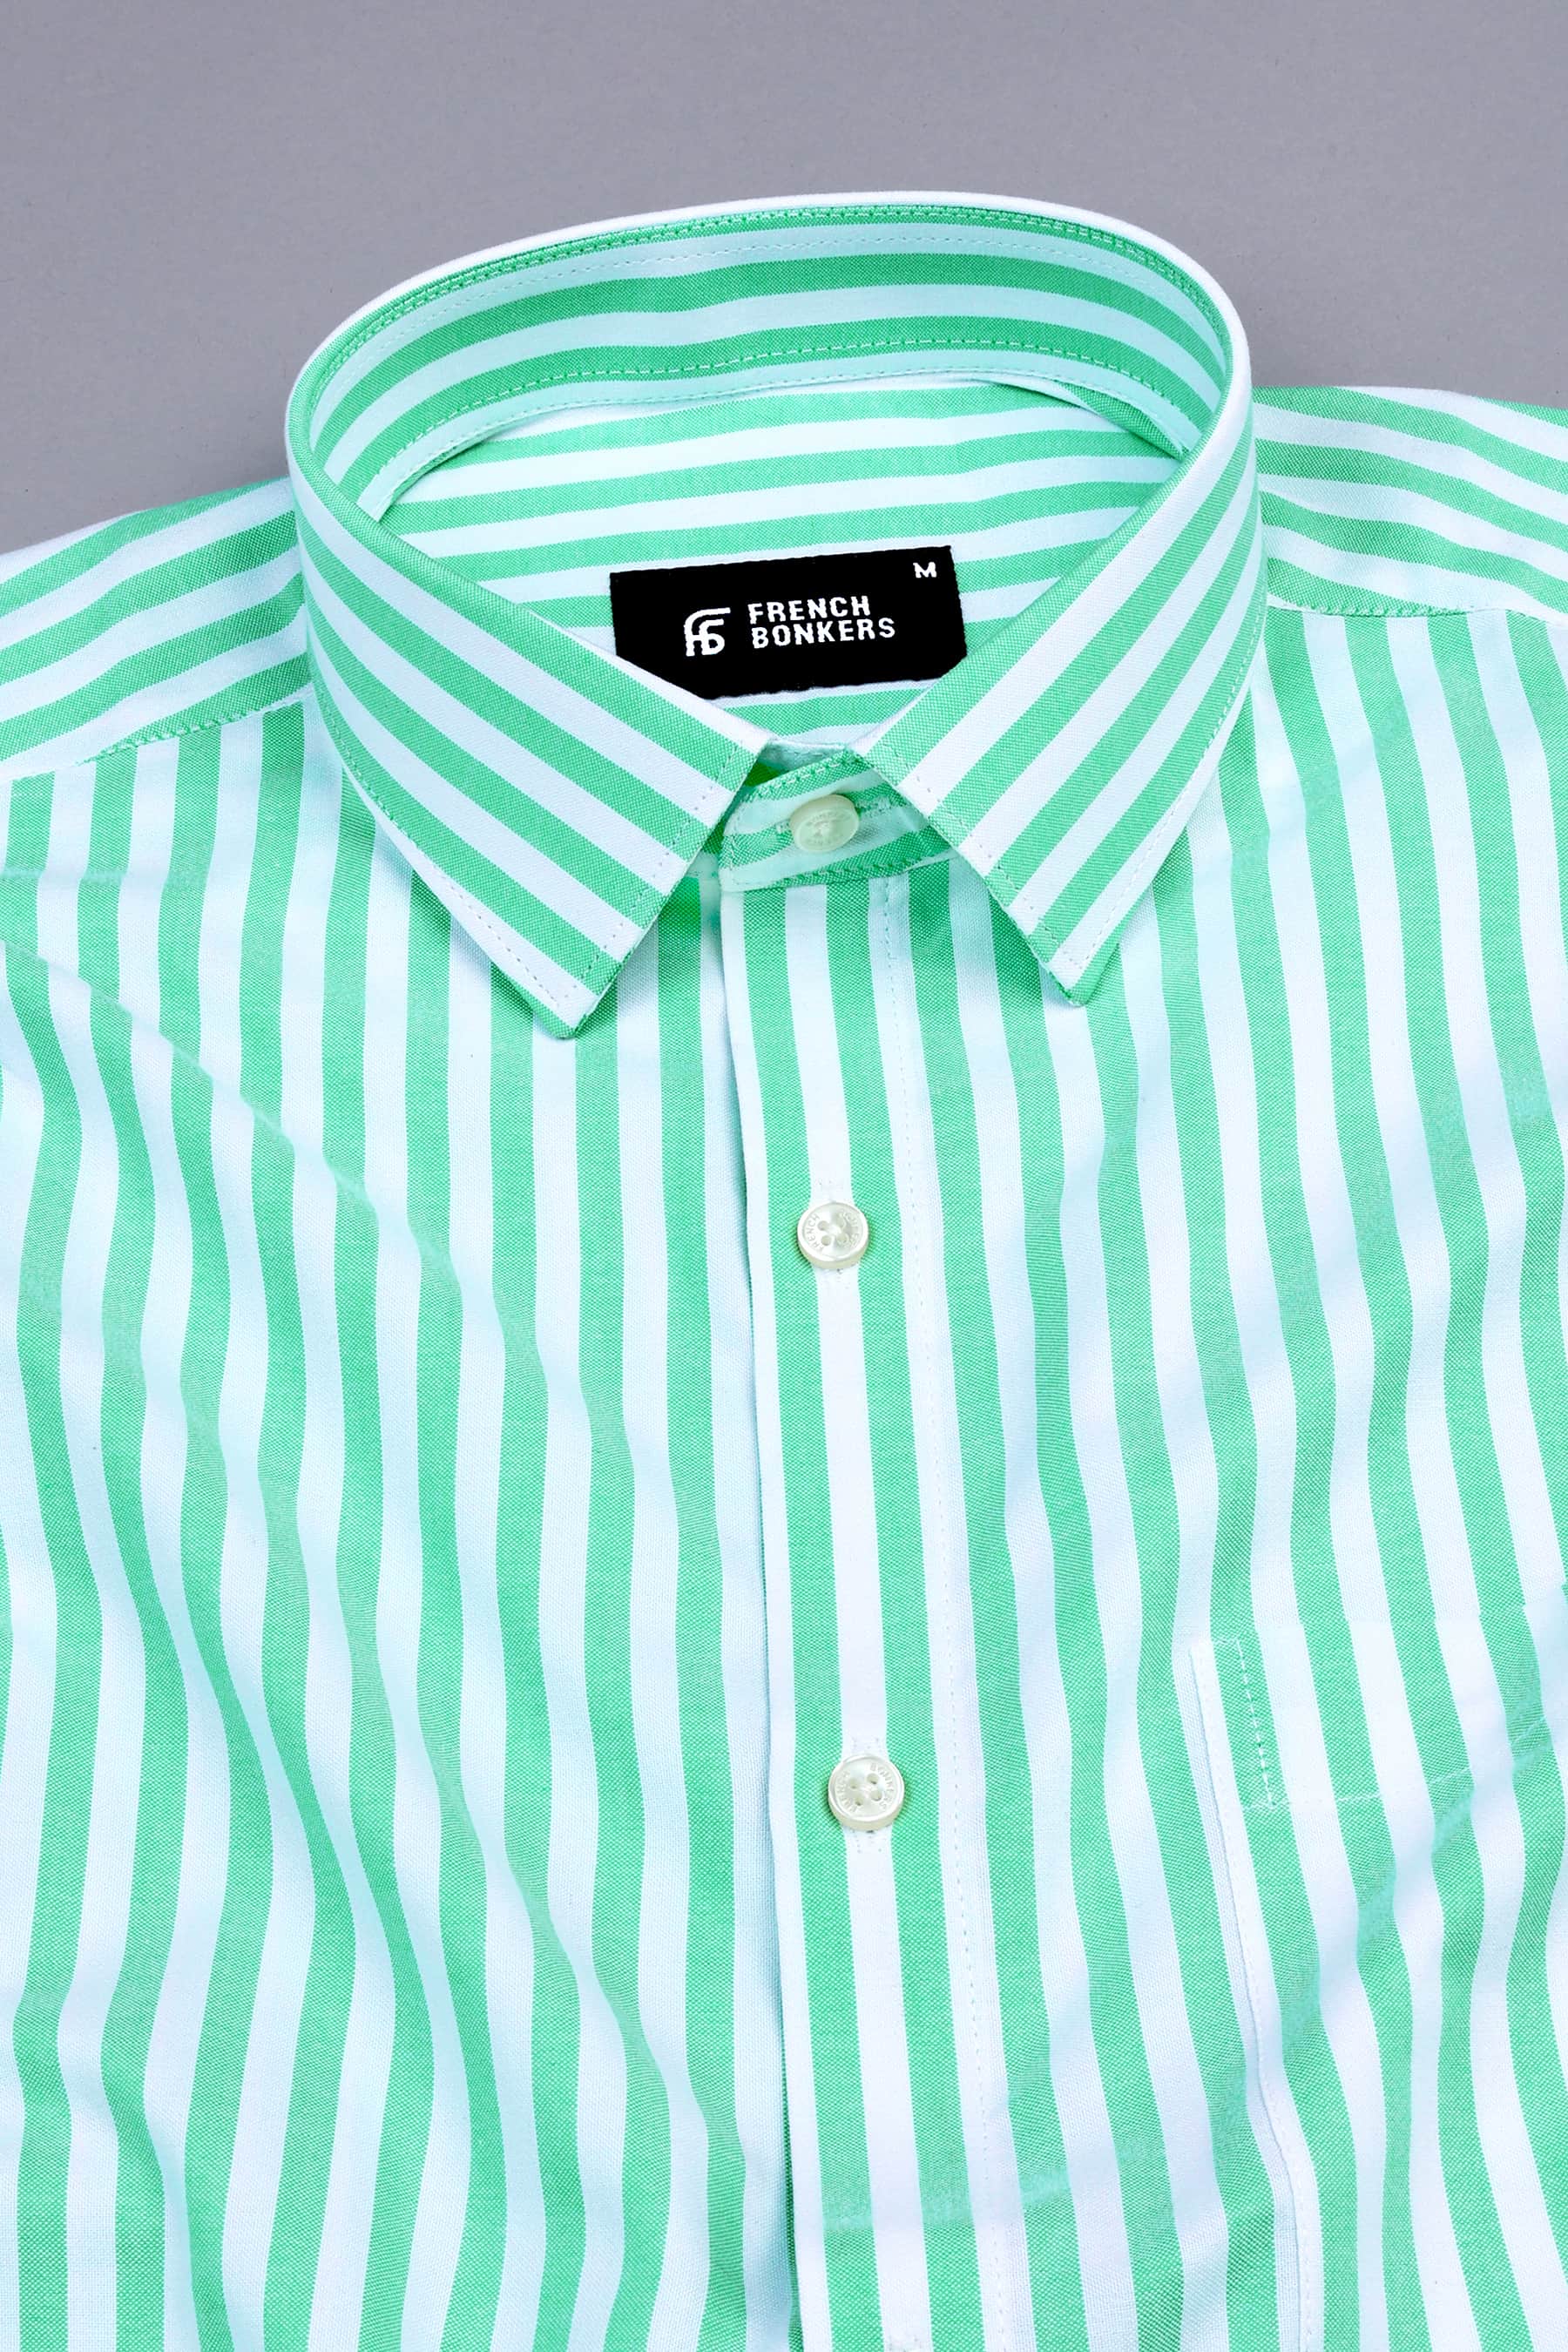 Mint green with white oxford bengal stripe shirt